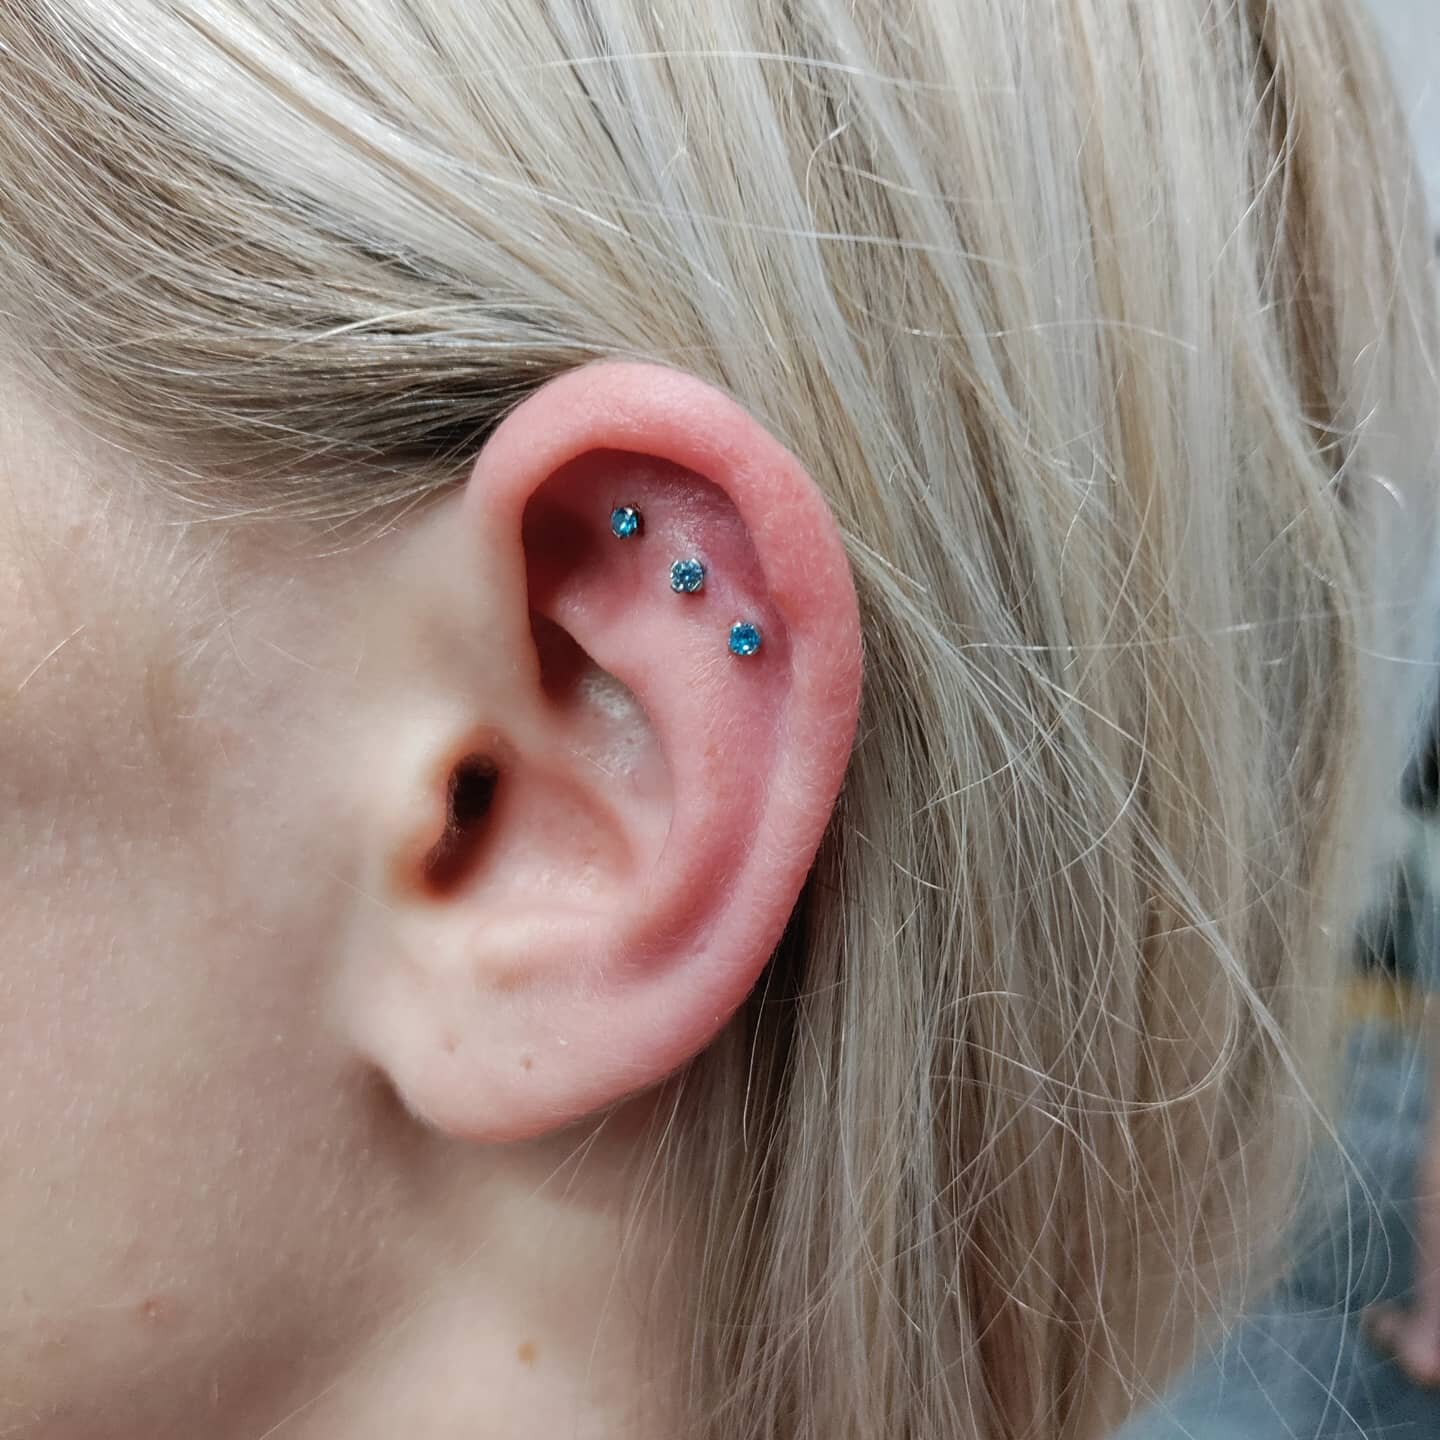 #triplecartilagepiercing from yesterday! An excellent solution aesthetically if you lack the proper anatomy for an industrial piercing. We make it work ☺️

@arielmasonpiercing